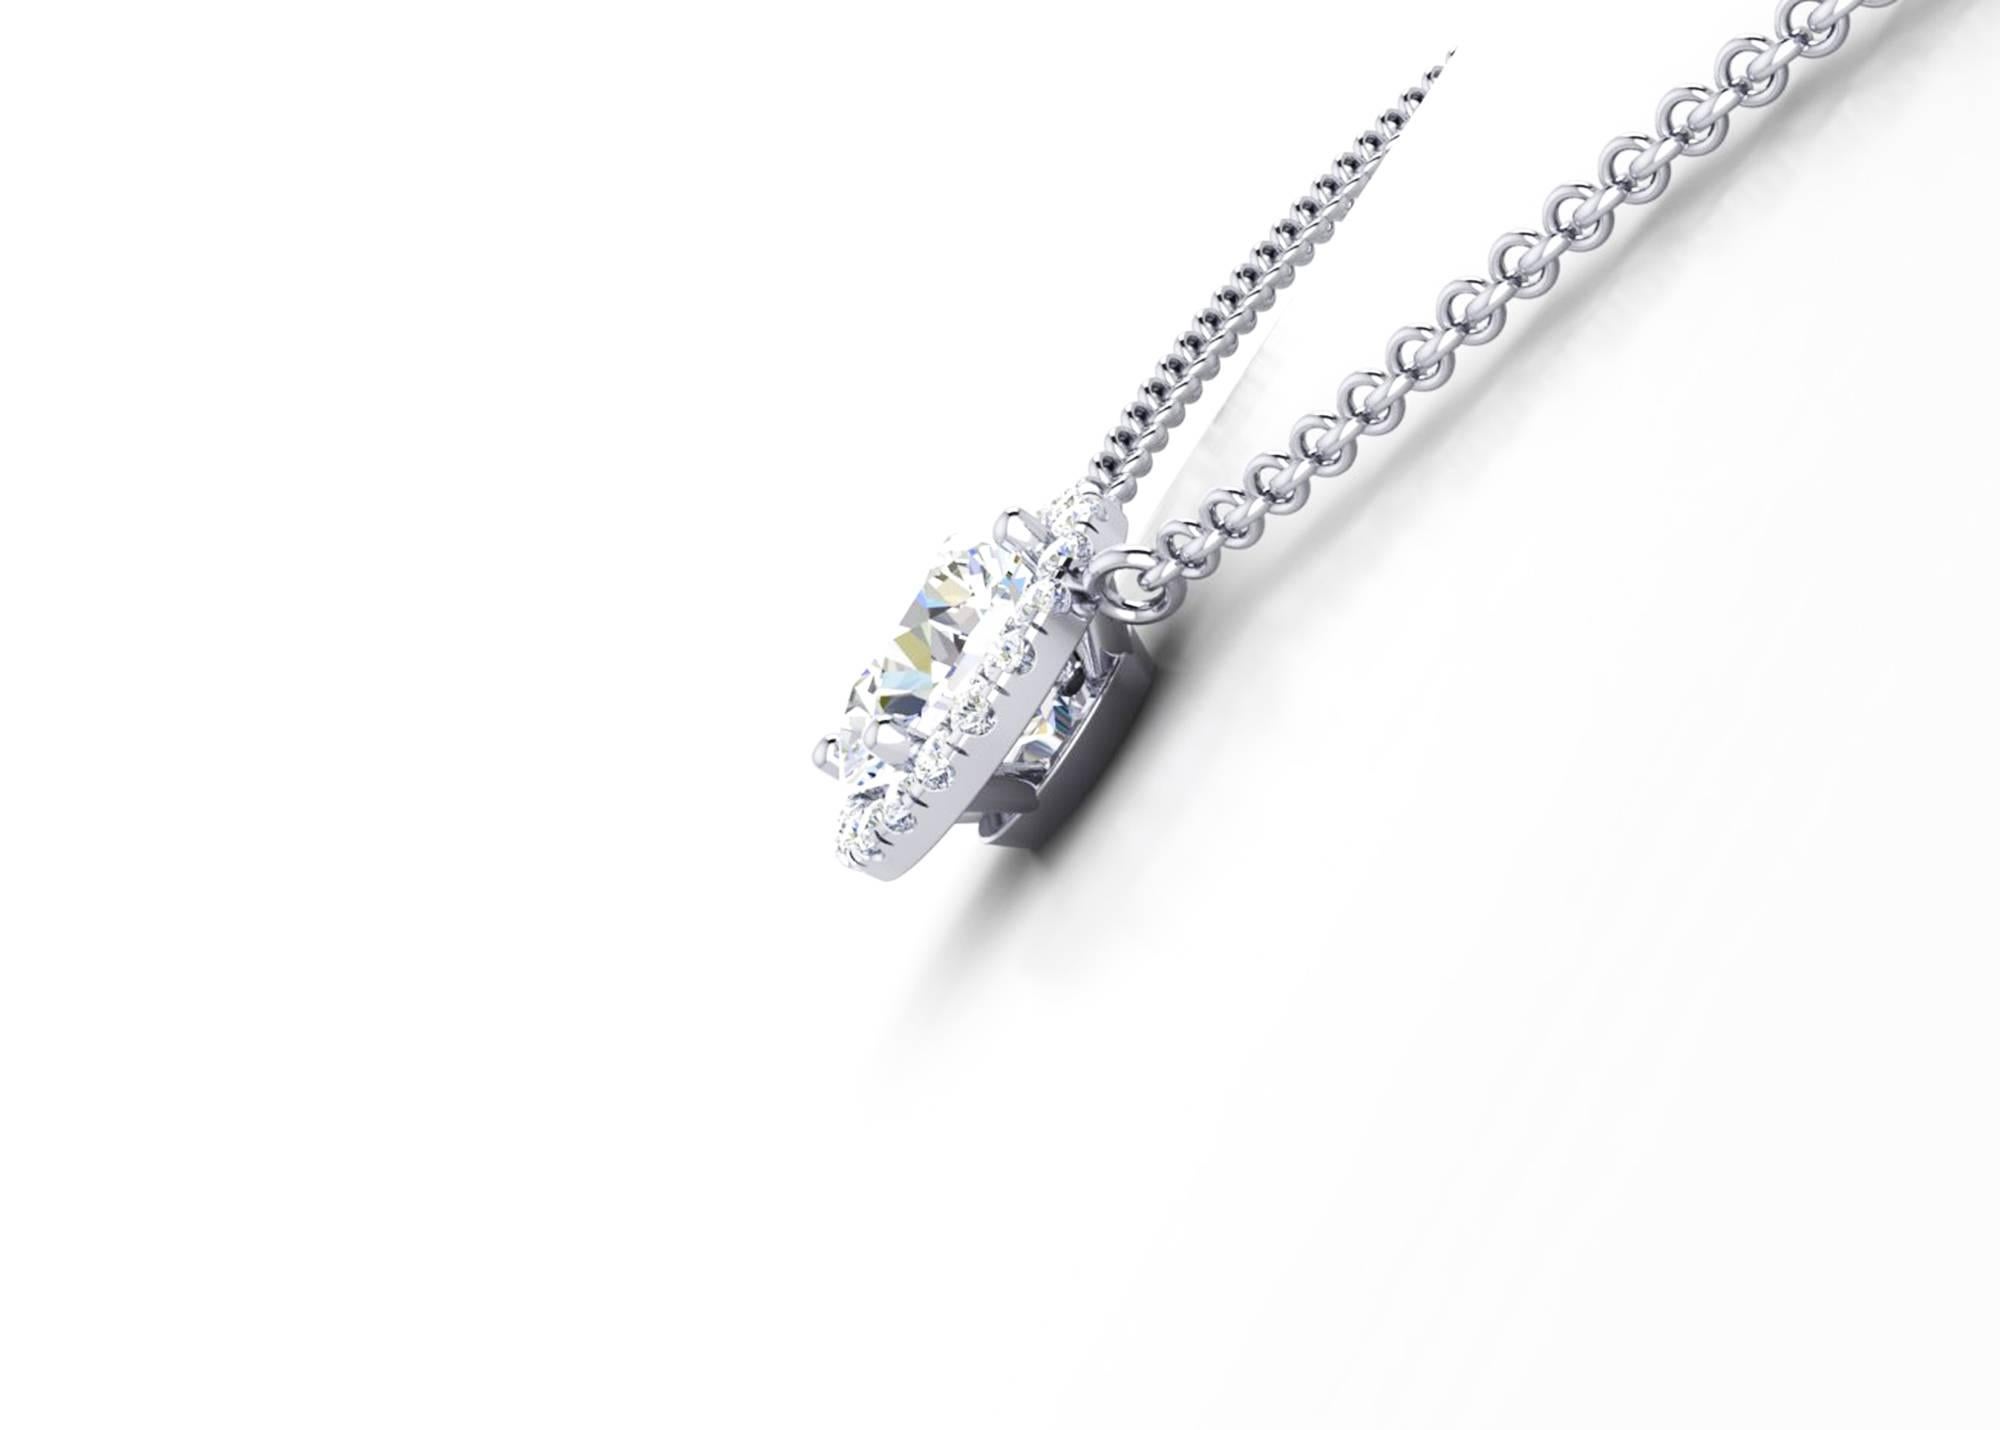 GIA Certified 1.06 Carat Diamond G color, IF internally flawless, Triple excellent specs, mounted on a Halo pendant showcasing a total diamond weight of 0.08 carats, made in Platinum in New York City by Italian master jeweler with a Platinum chain